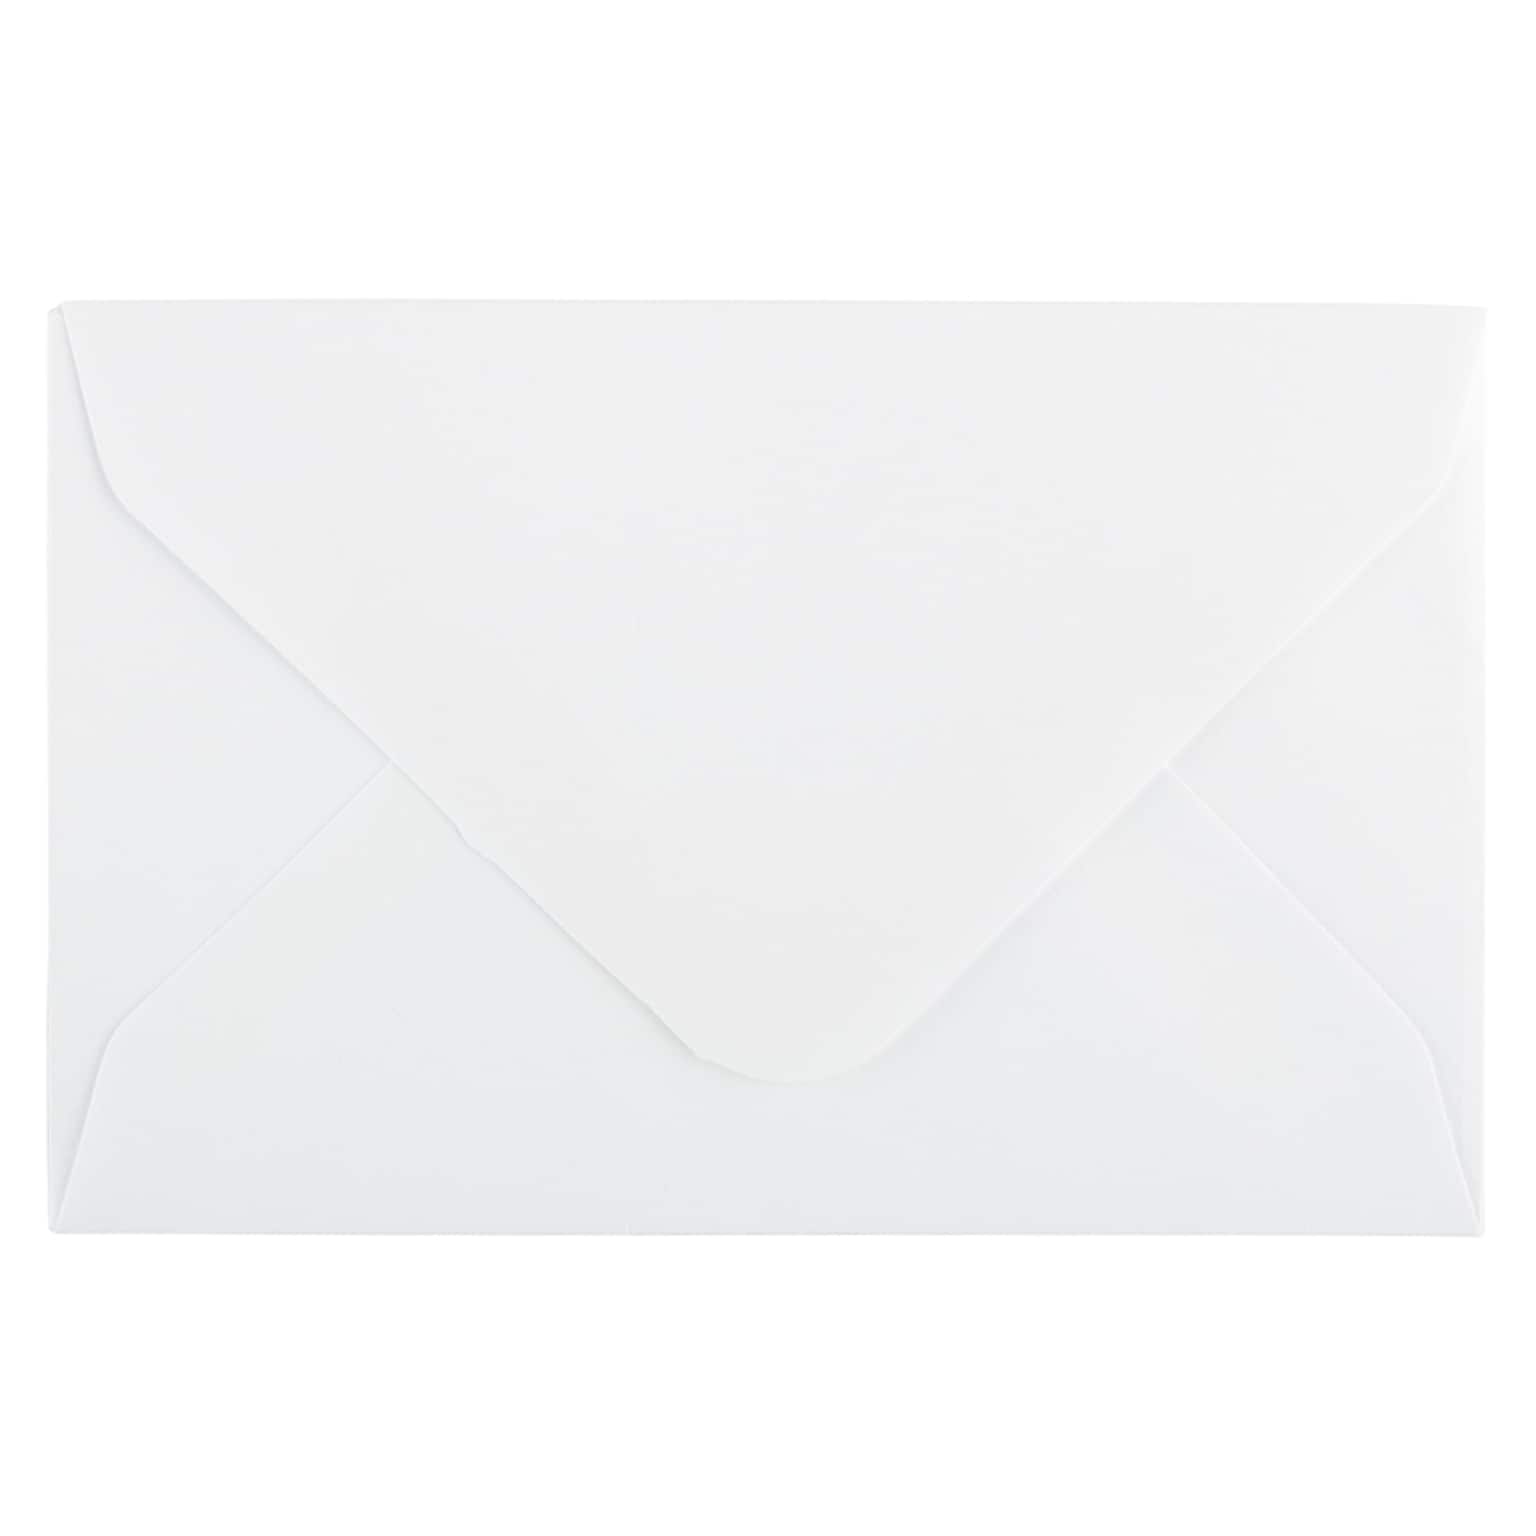 JAM Paper Mini Currency Envelope, 2 3/4 x 3 3/4, White, 100/Pack (201246A)